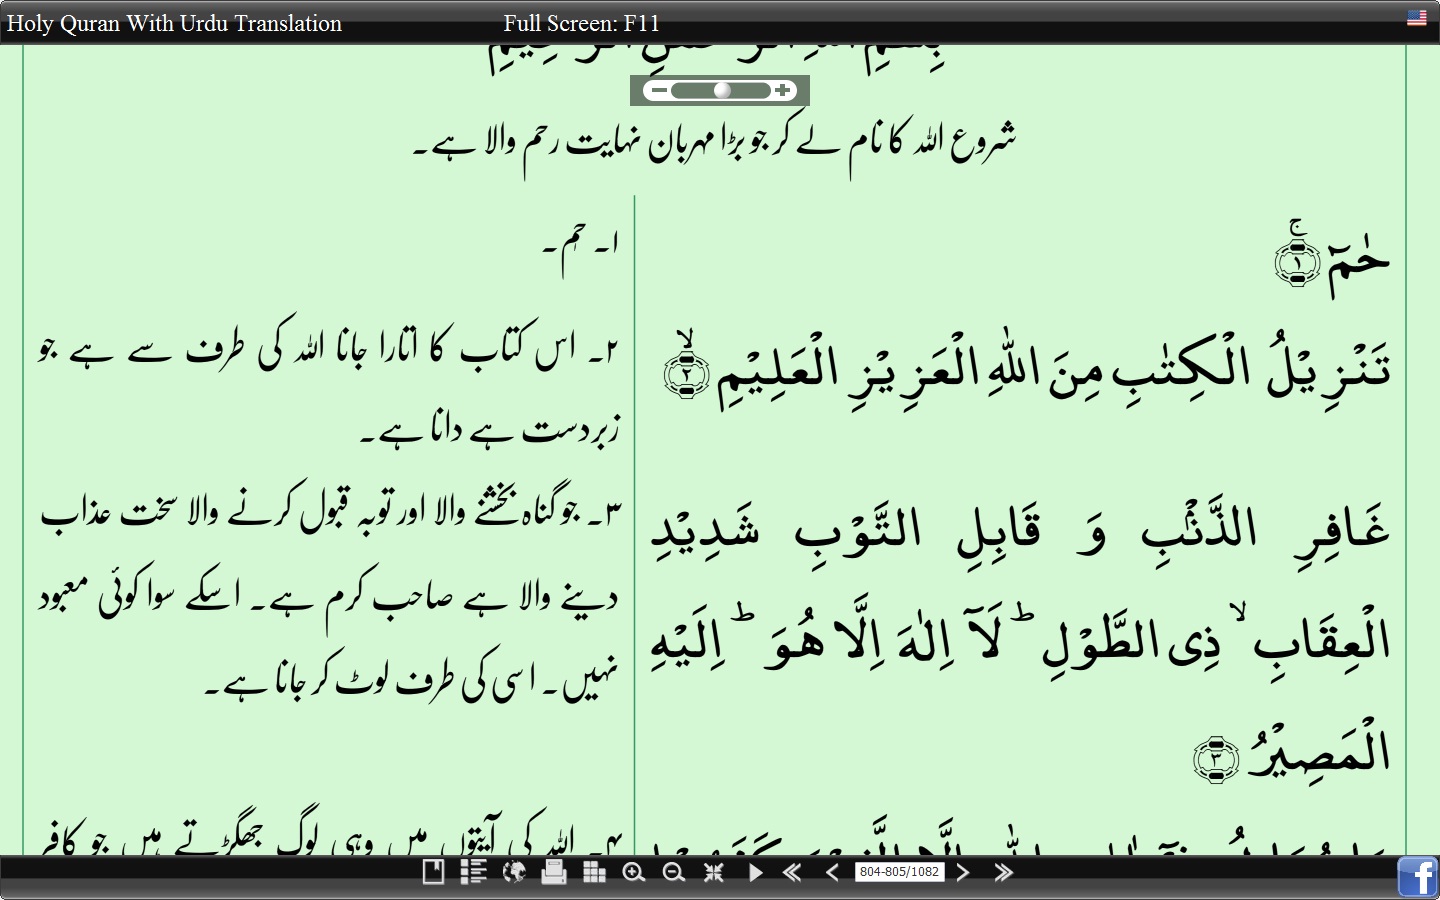 The holy quran with word by word urdu translation in pdf: divine.